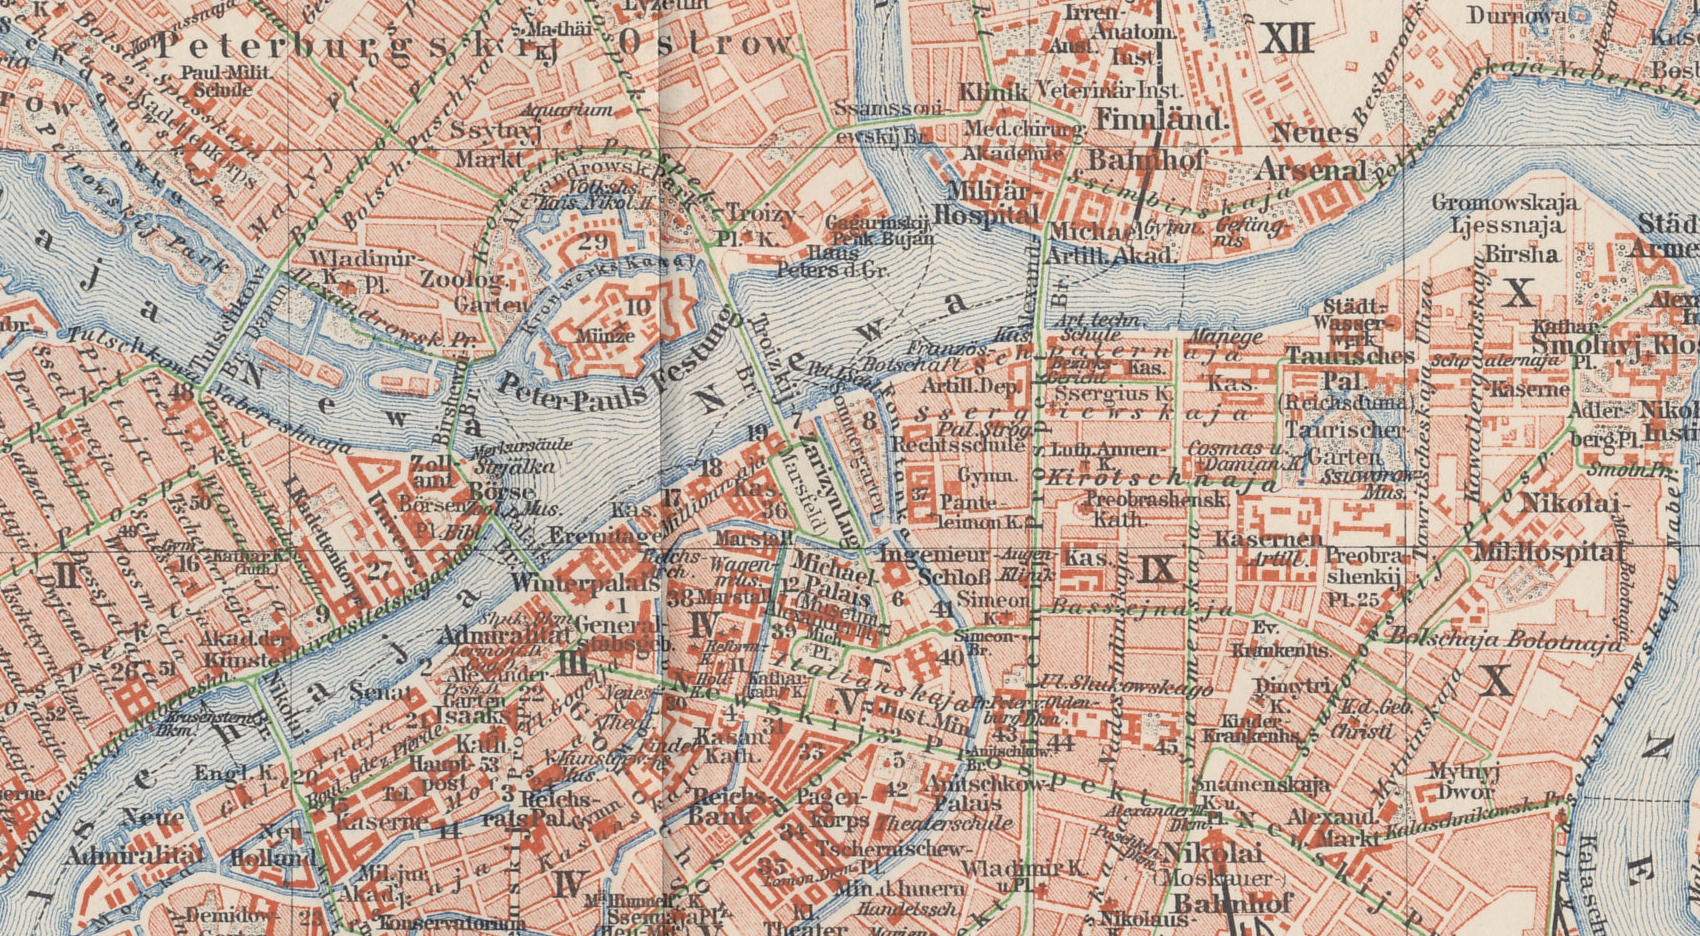 Central detail from a 1898 map of St. Petersburg, the Russian capital, from a German atlas. Central St Petersburg, or Petrograd, is on the Neva River. Key landmarks include the Peter and Paul Fortress, which served as a prison, Nevski Prospect, a primary boulevard south of the Fortress, the Finland Train Station, east of the Fortress, where Lenin made his triumphal return, the Tauride (Taurisches) Palace, which housed the Duma and later the Petrograd Soviet.
Text:
Neva River, Peter and Paul Fortress; Nevski Prospect, Finland Bahnhof (Train Station); Taurisches (Tauride) Palace